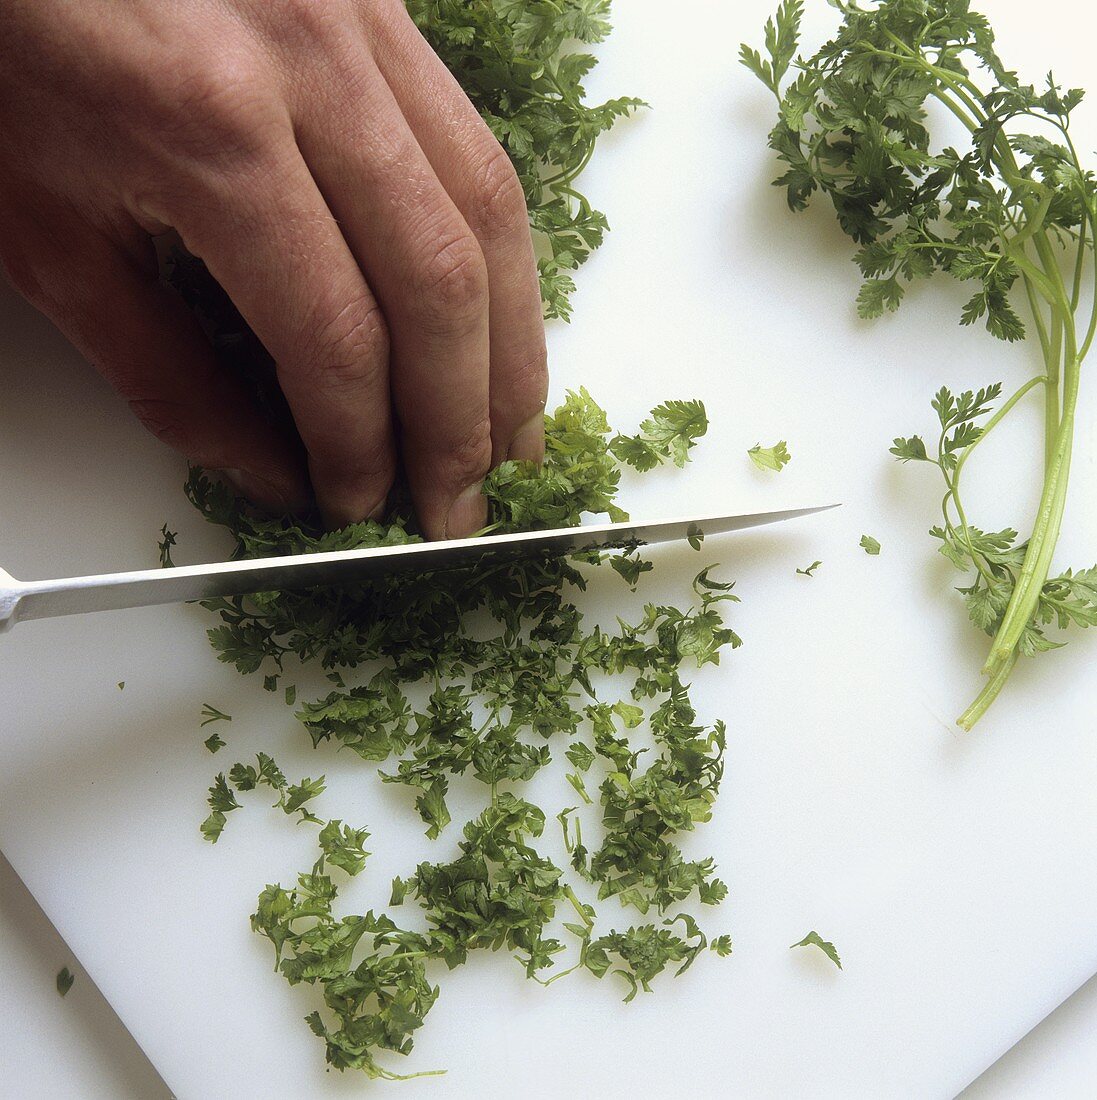 Finely chopping chervil